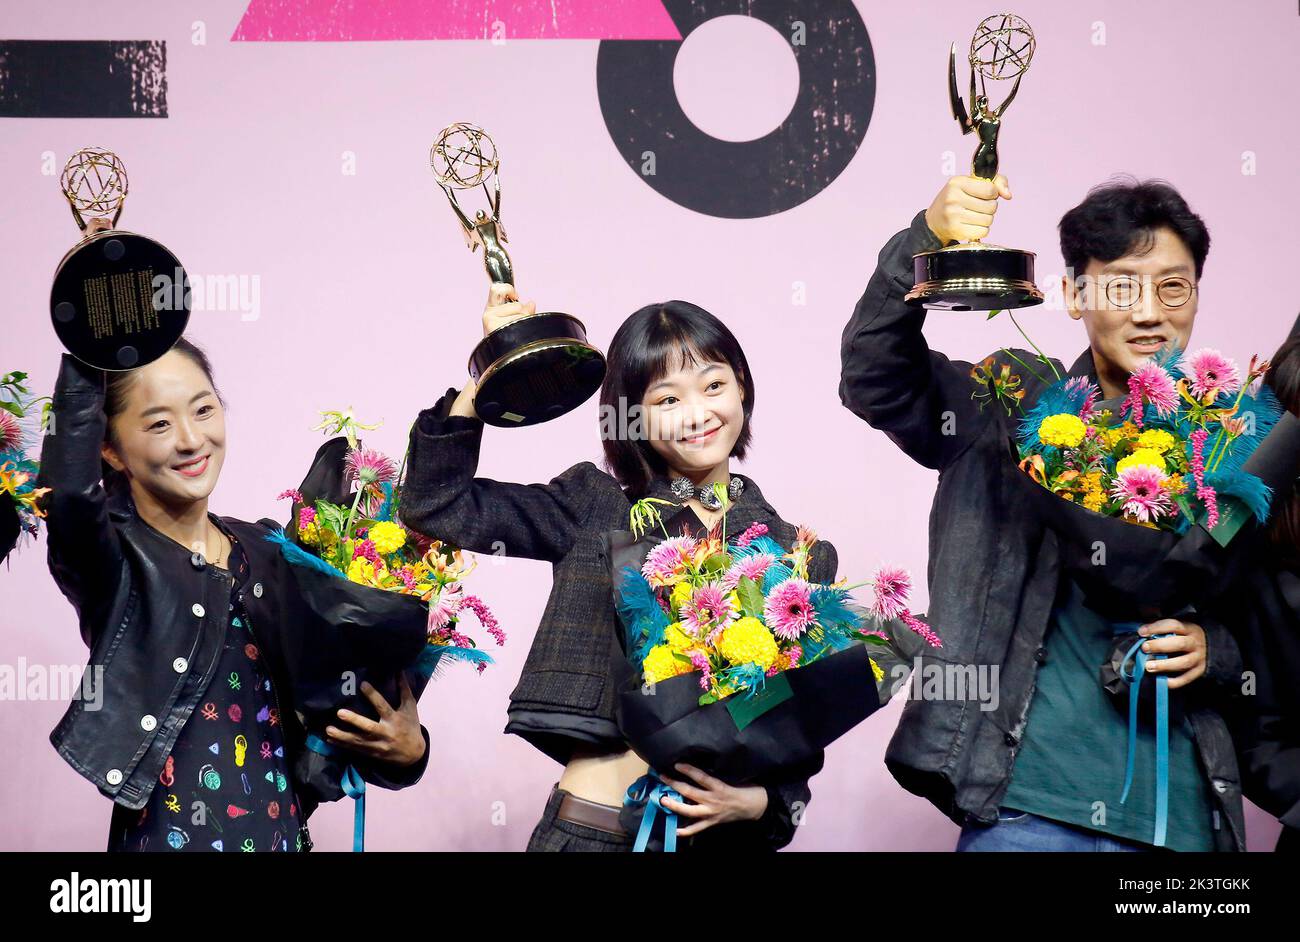 (L-R) Chae Kyoung-Sun, Lee Yoo-Mi and Hwang Dong-Hyuk, Sep 16, 2022 : Production designer Chae Kyoung-Sun of 'Squid Game', a winner of the Emmy award for the best production design for a narrative contemporary program, actress Lee Yoo-Mi, a winner of the Emmy award for outstanding guest actress in a drama series and director Hwang Dong-Hyuk pose at a press conference held to celebrate the Netflix series' six Emmy wins in Seoul, South Korea. The South Korean survival drama tv series created by Hwang Dong-Hyuk for Netflix bagged a total of six Emmy titles including best director for Hwang and be Stock Photo